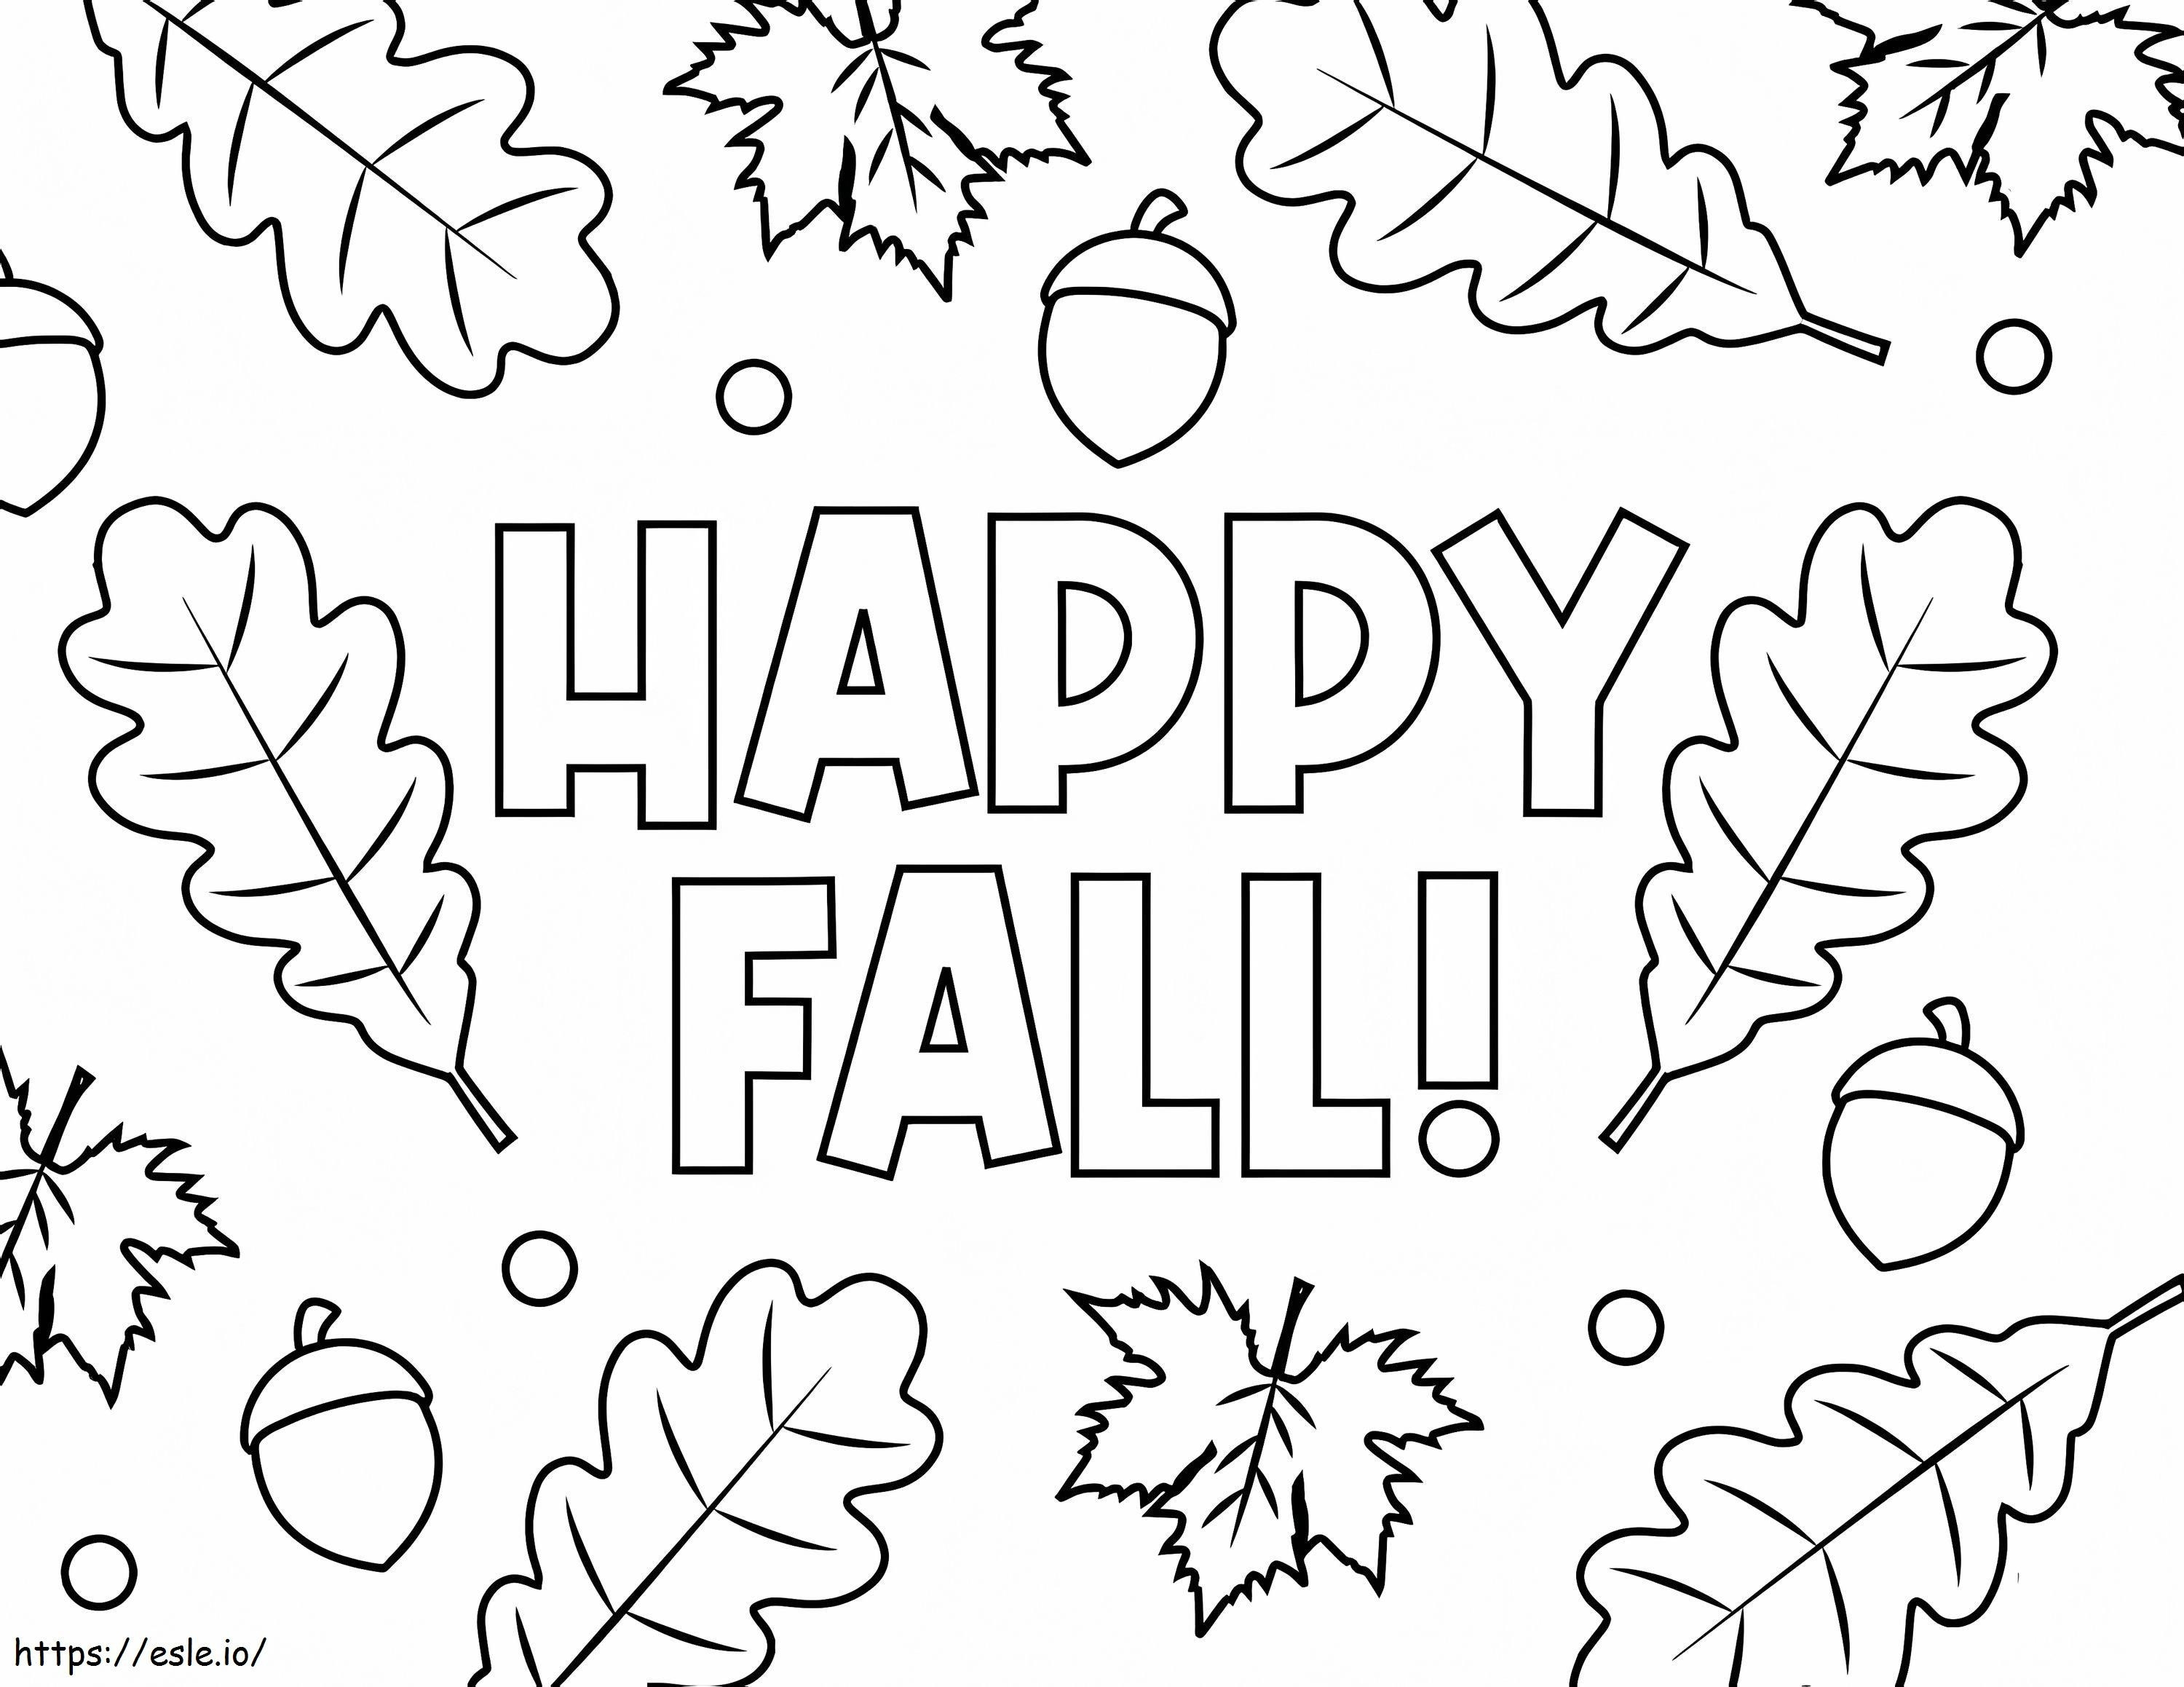 Happy Autumn With Leaf coloring page